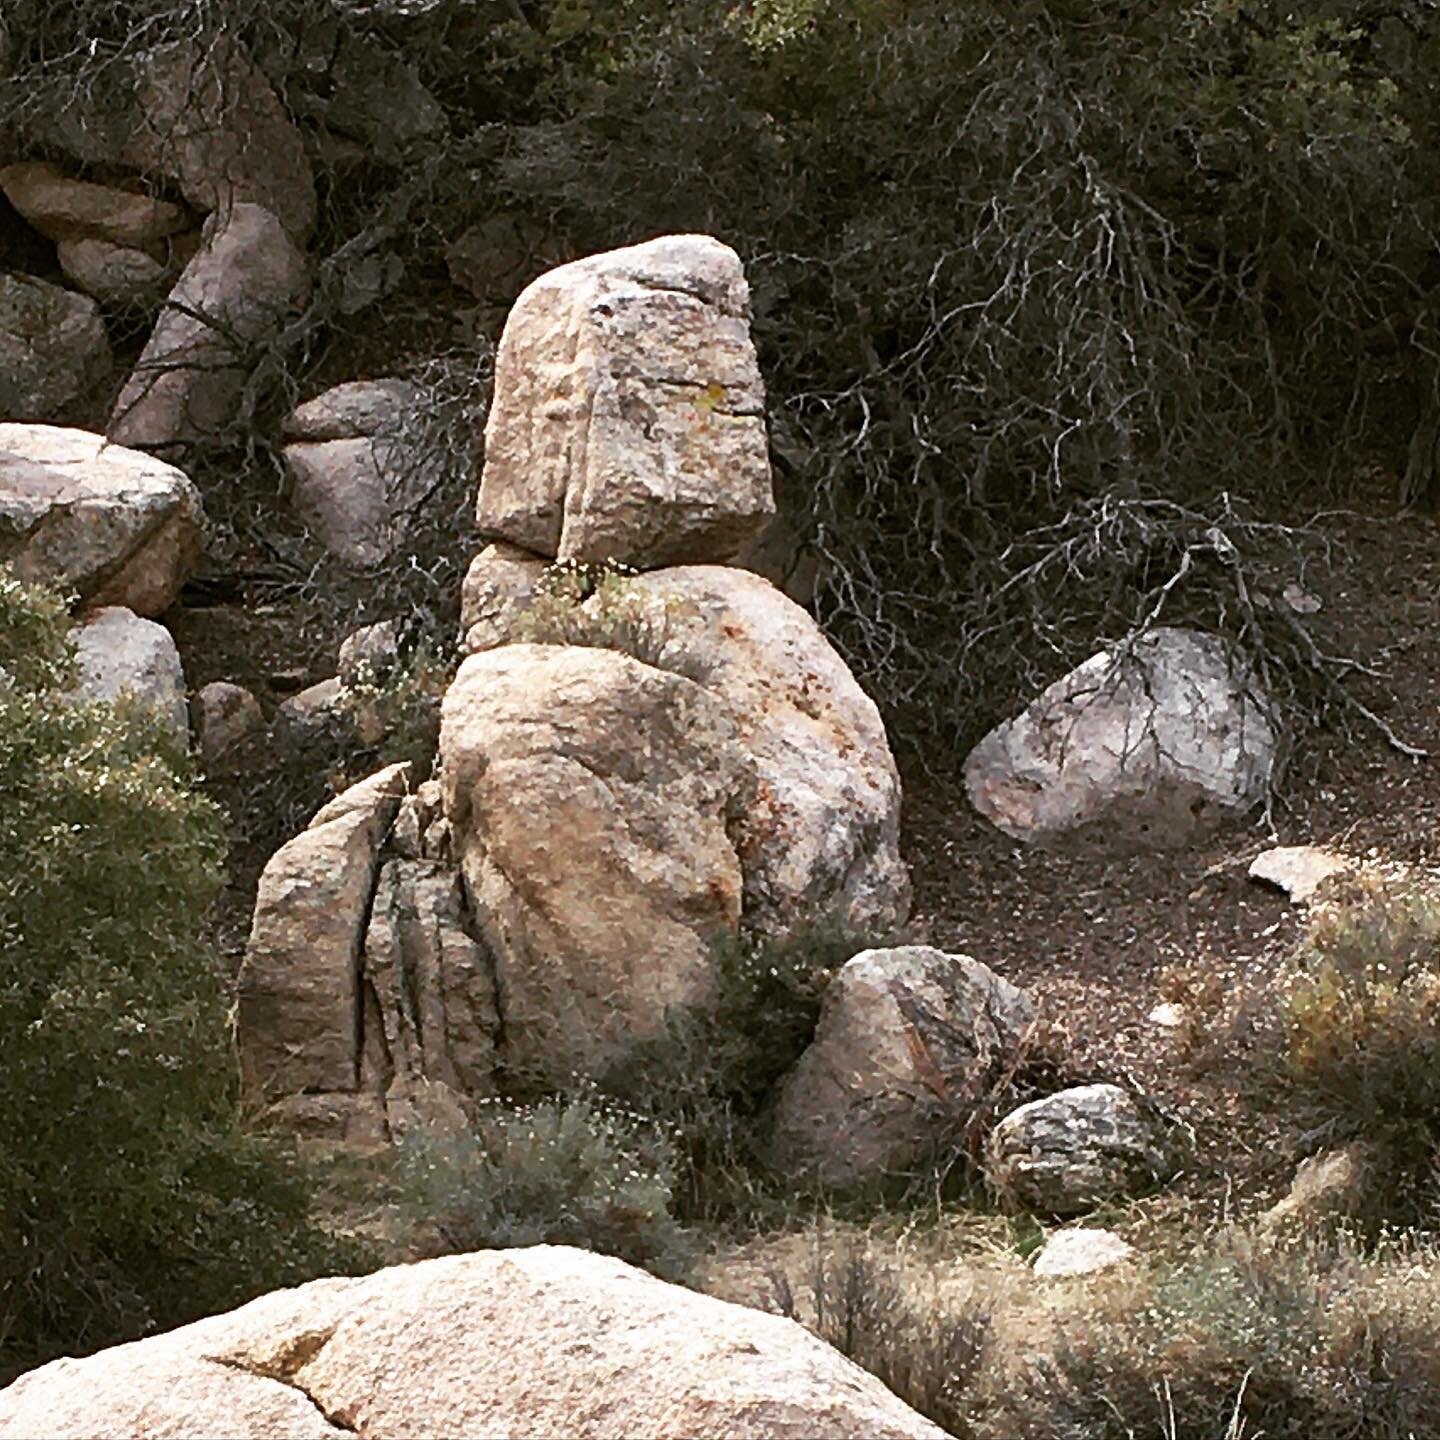 Taking time away from my incessant drive to create. Communing with a primordial female guardian in Joshua Tree, 🧘🏽&zwj;♂️⛩
.
.
.
#energymedicine #tao #guardianwoman #naturespirituality #communingwithnature #meditationeveryday #spiritualenergy #live